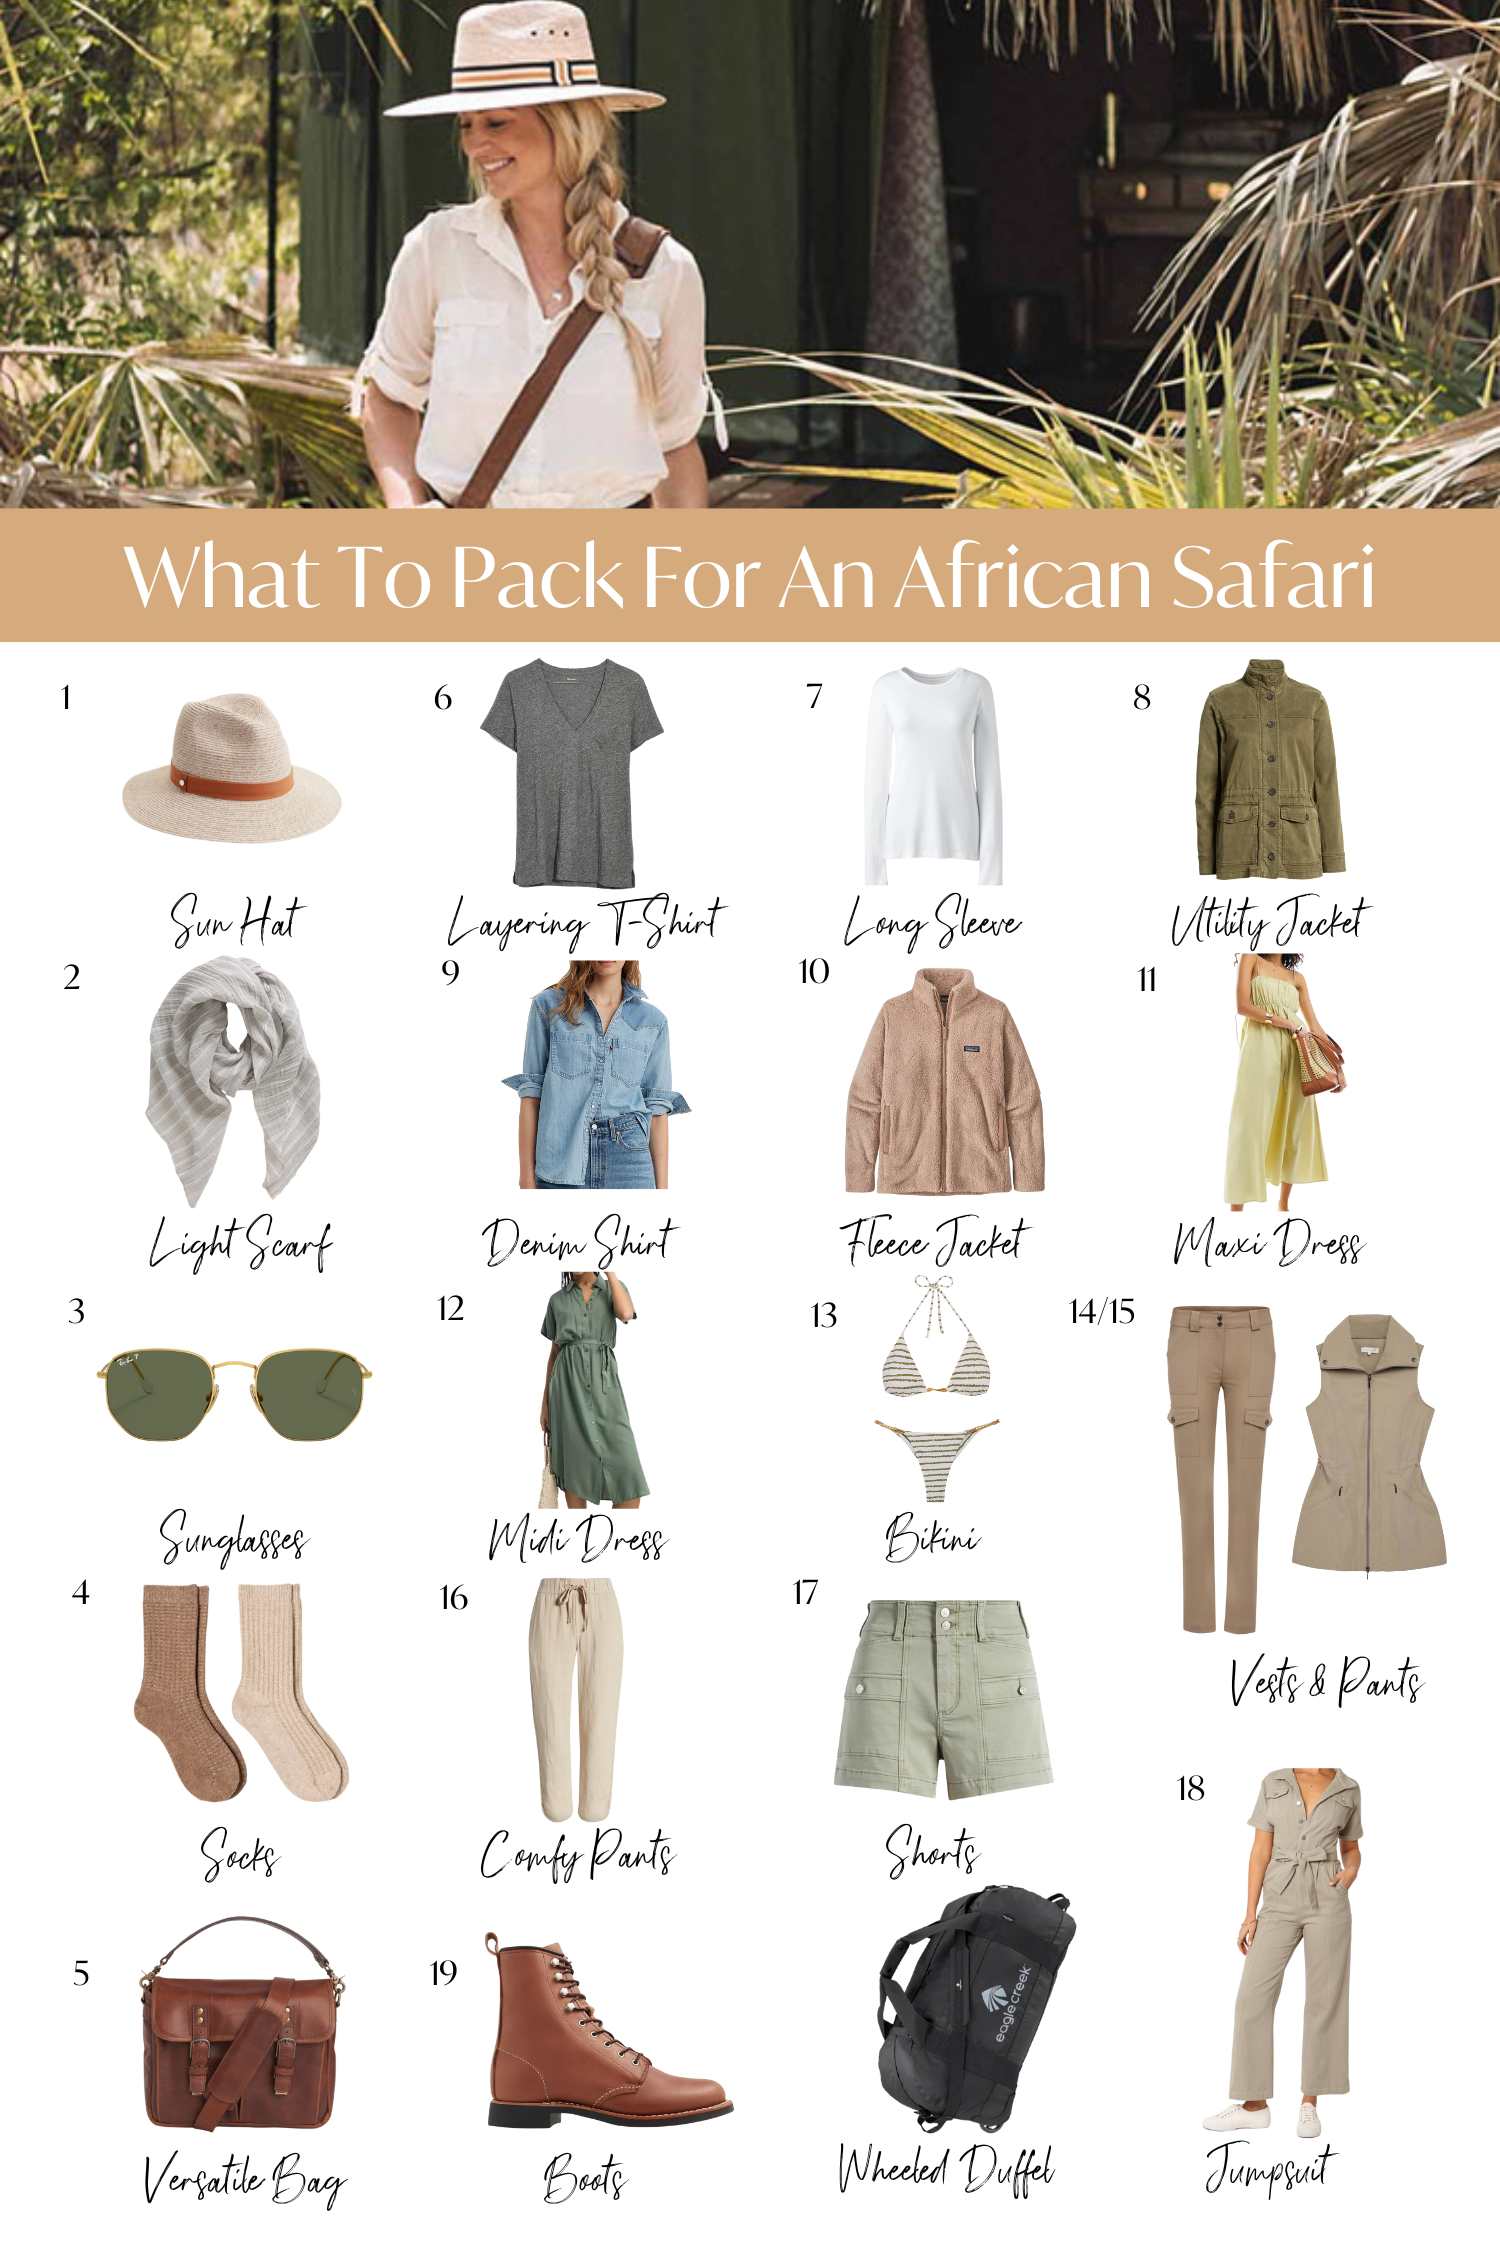 What To Pack For An African Safari